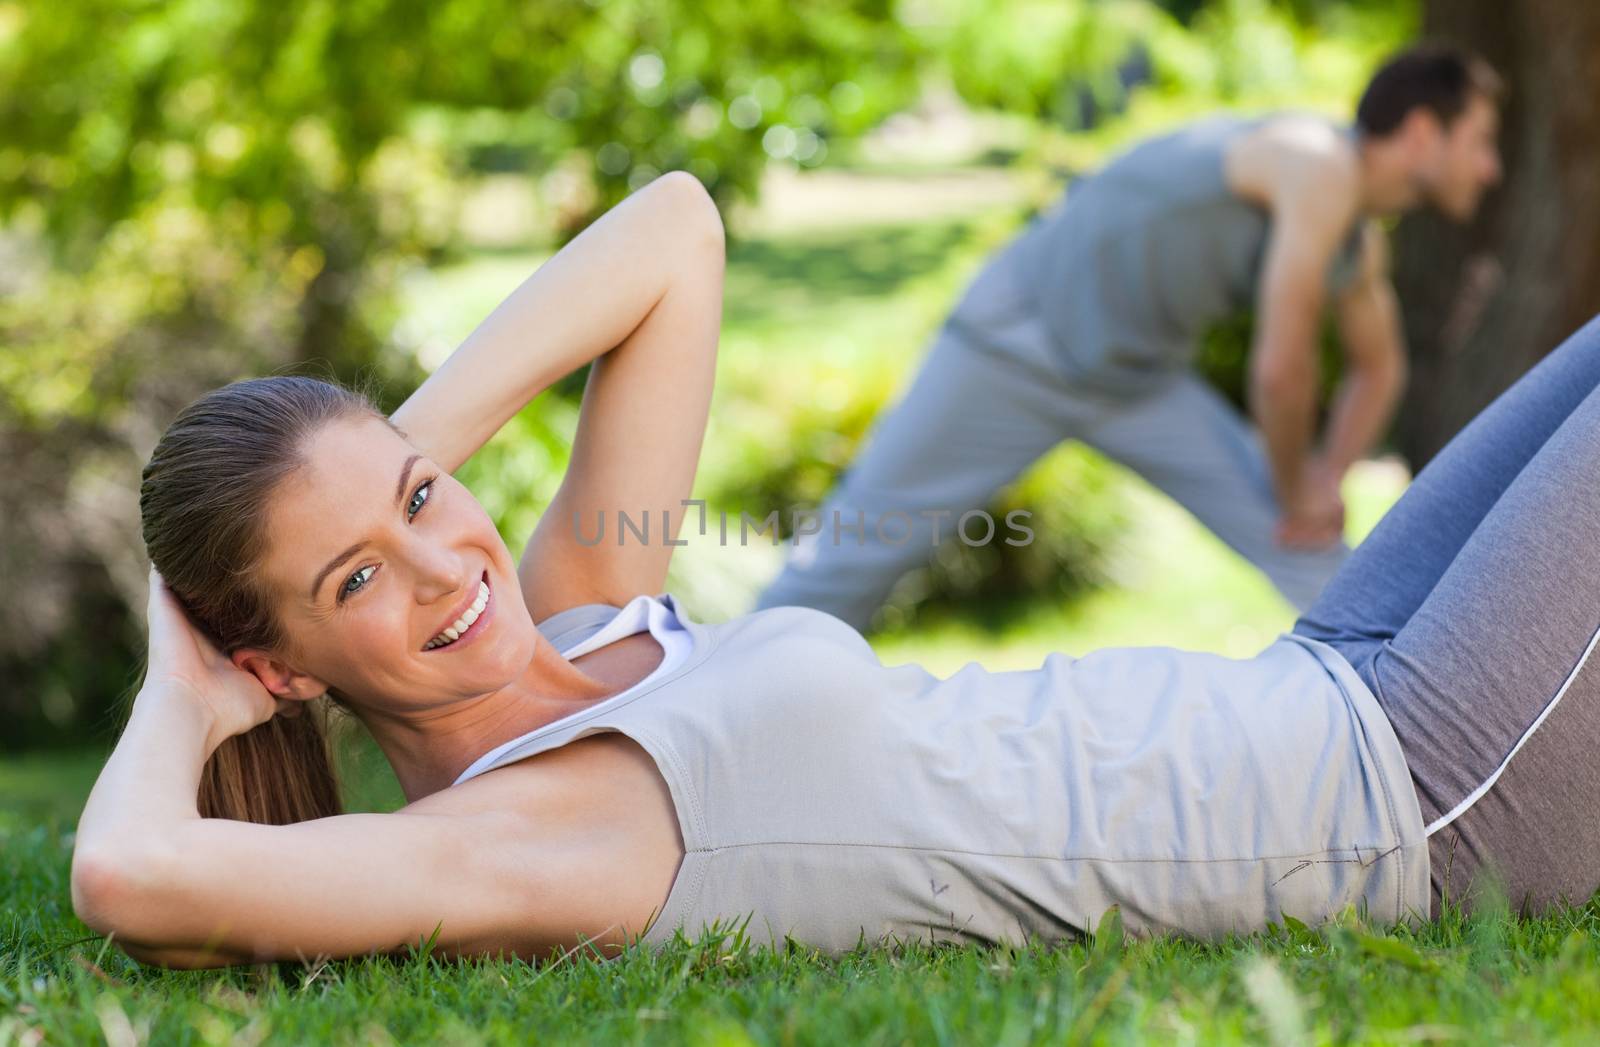 Couple doing their stretches in the park by Wavebreakmedia